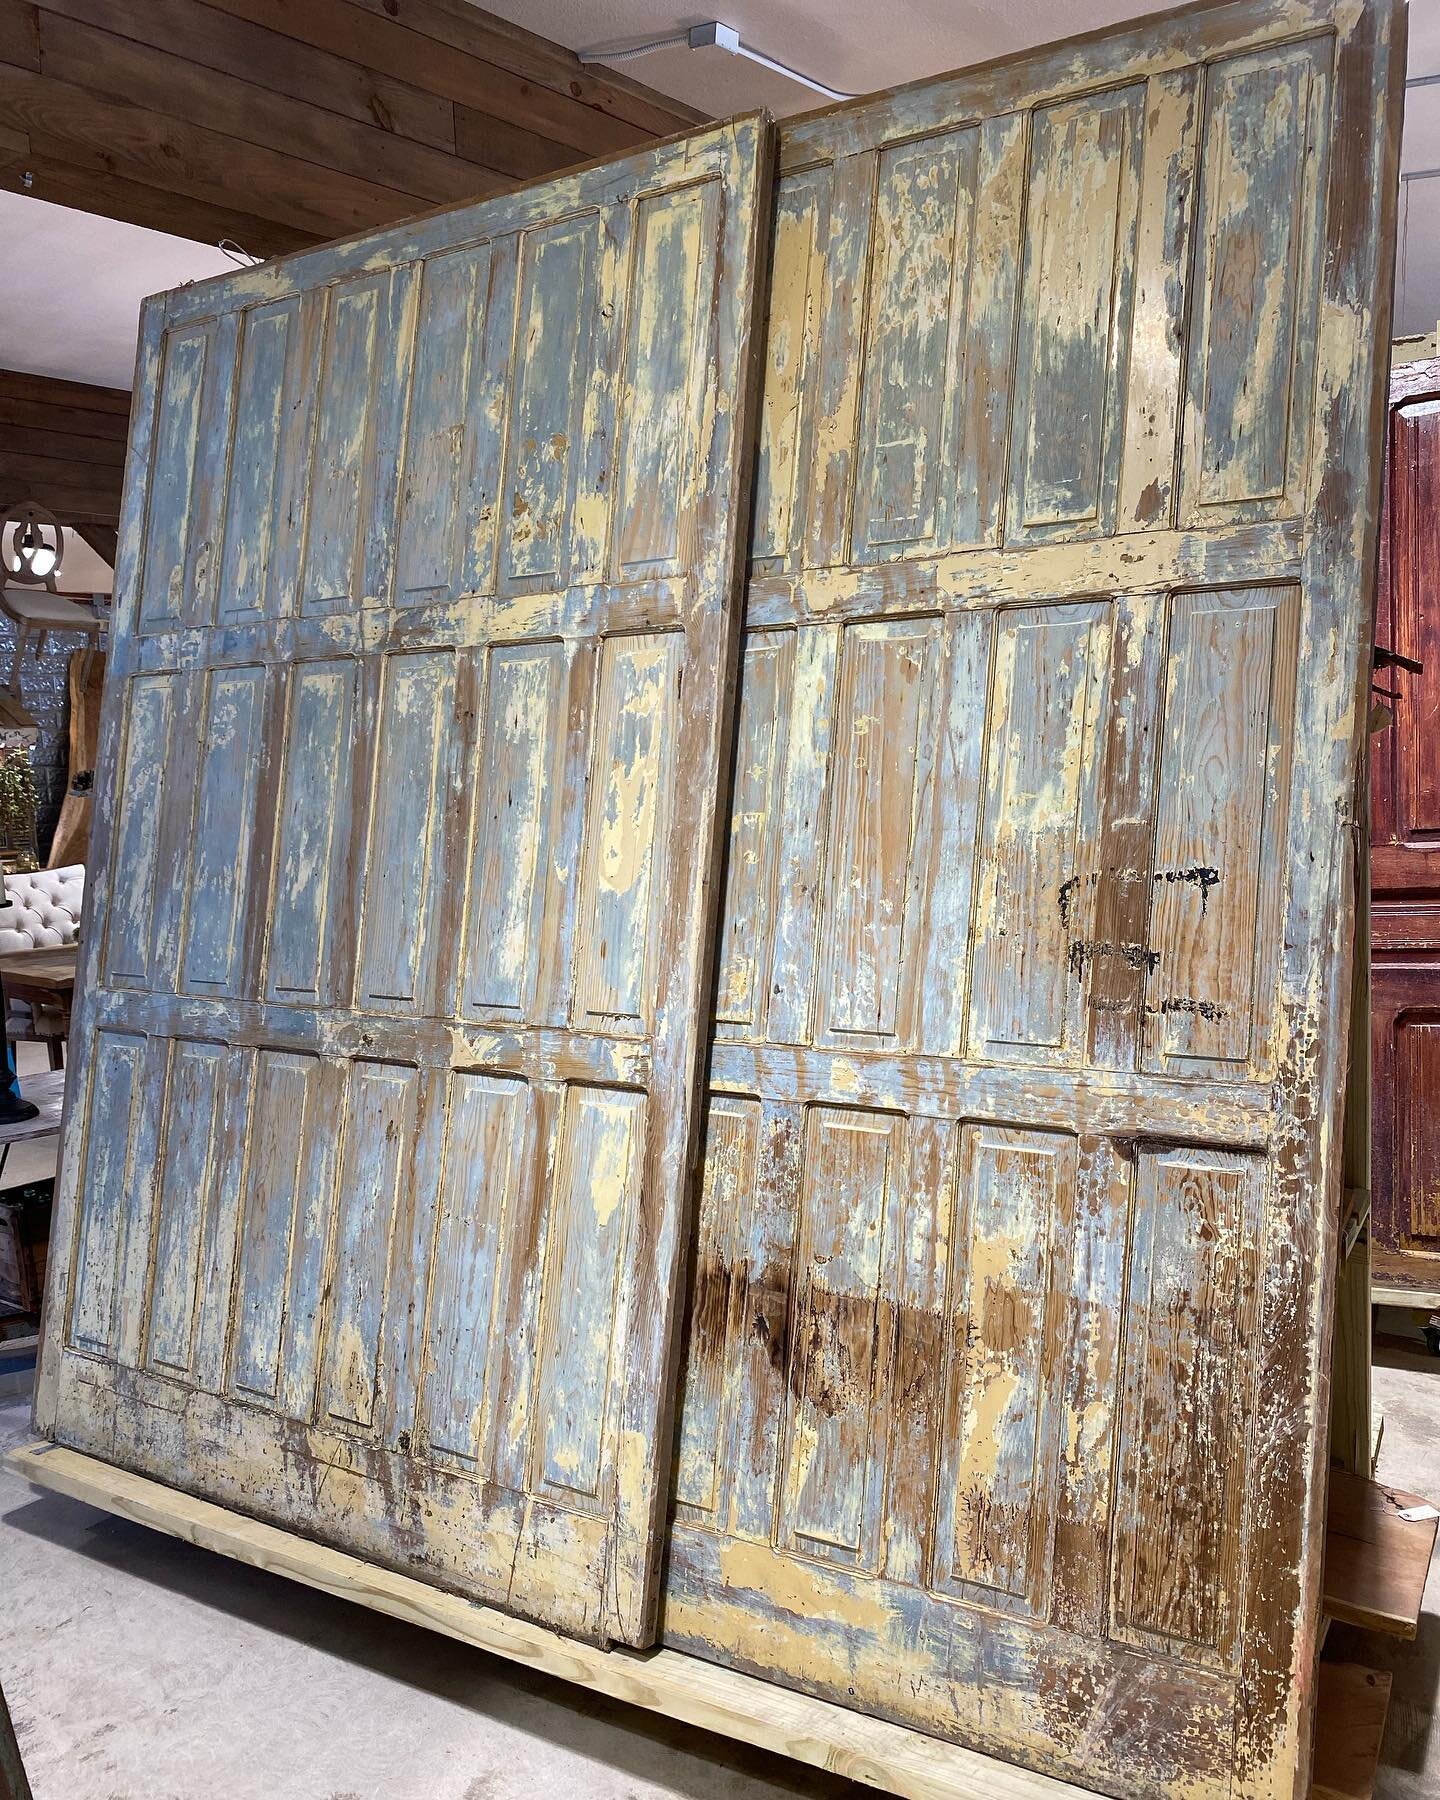 Look at what just arrived!! 
These FABULOUS Vintage Barn Doors.
97 1/4&rdquo; H x 63 1/2&rdquo; W

We are located at 1499 S. Main St., next to the Dog &amp; Pony Grill. Open Mon-Fri 10-5, Sat 10-6, Sun 12-3. 

#architecturalsalvage #barndoor 
#boerne